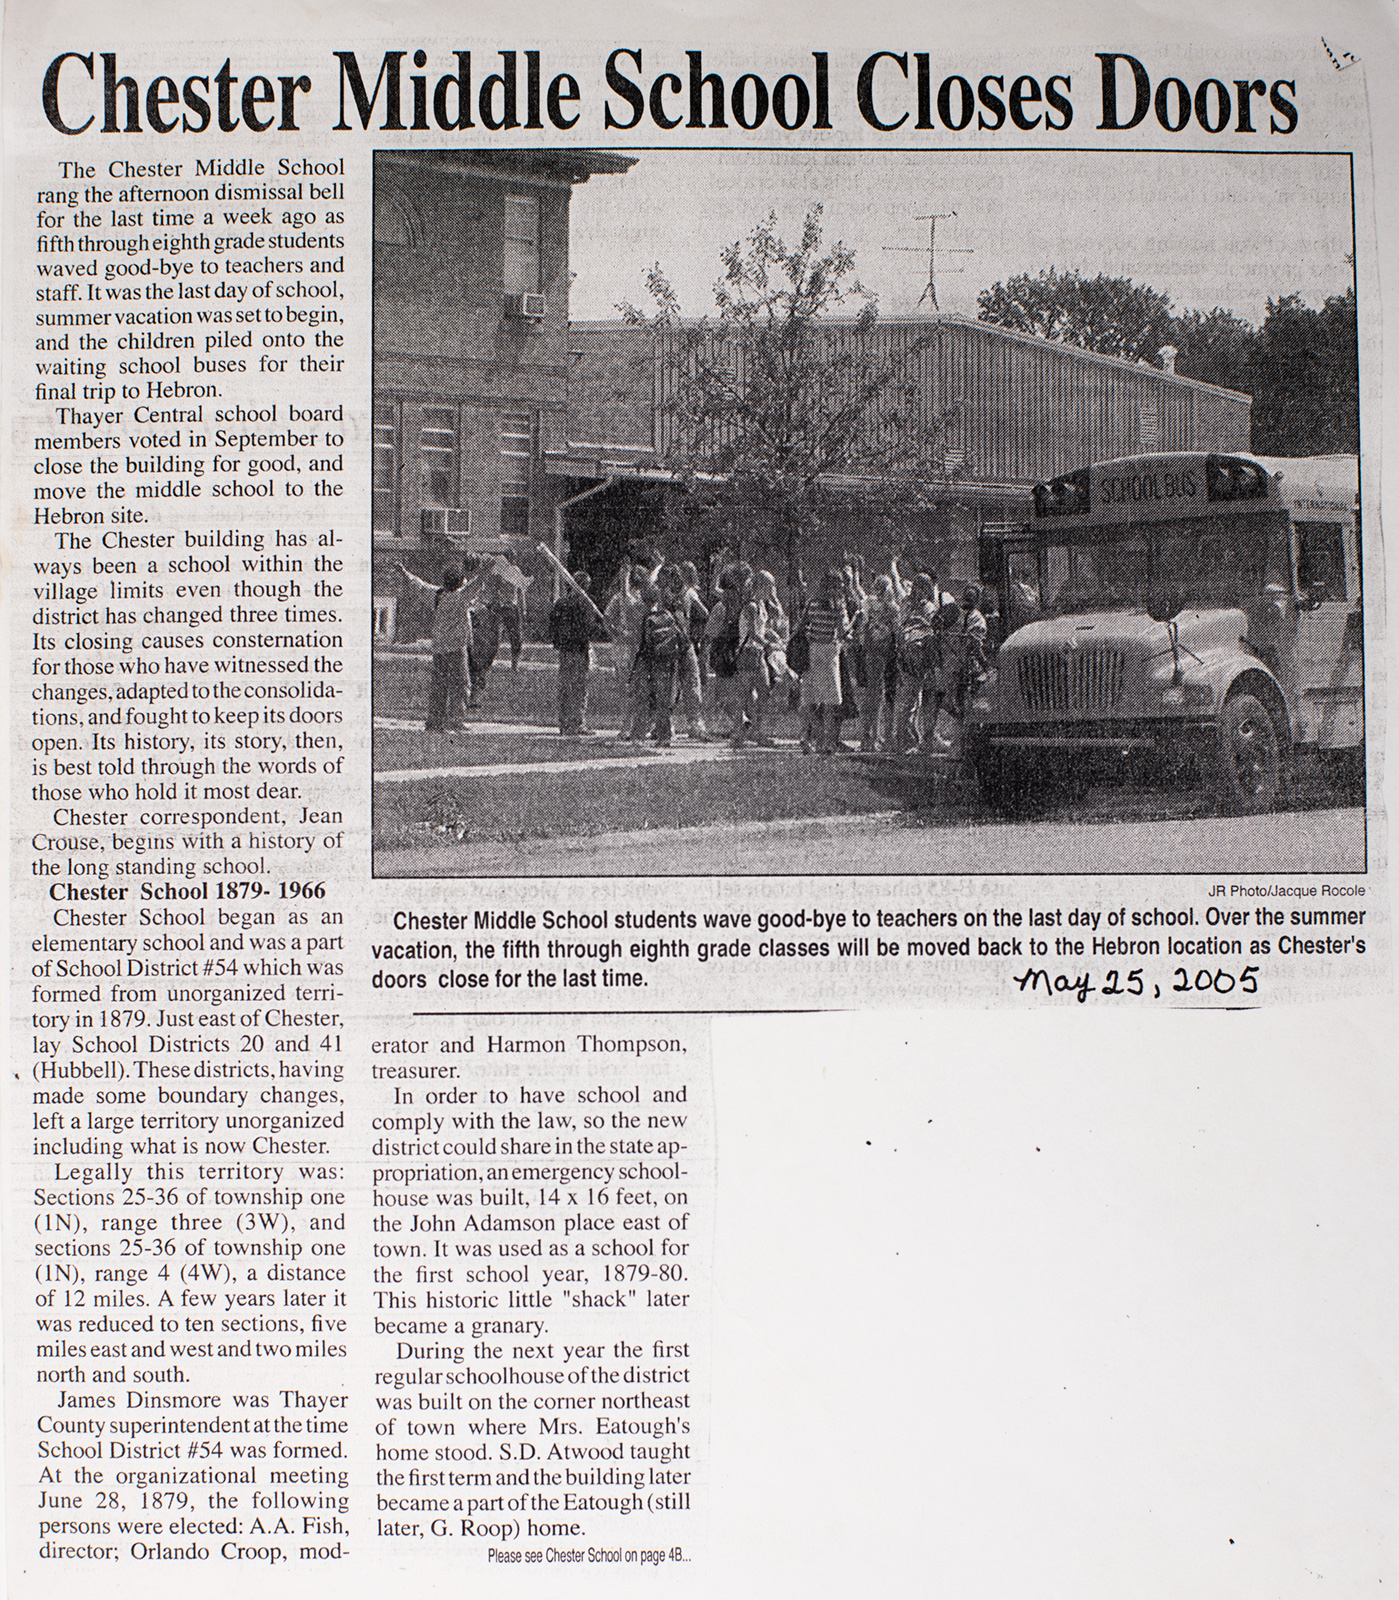 Newspaper Clipping "Chester Middle School Closes Doors"-image